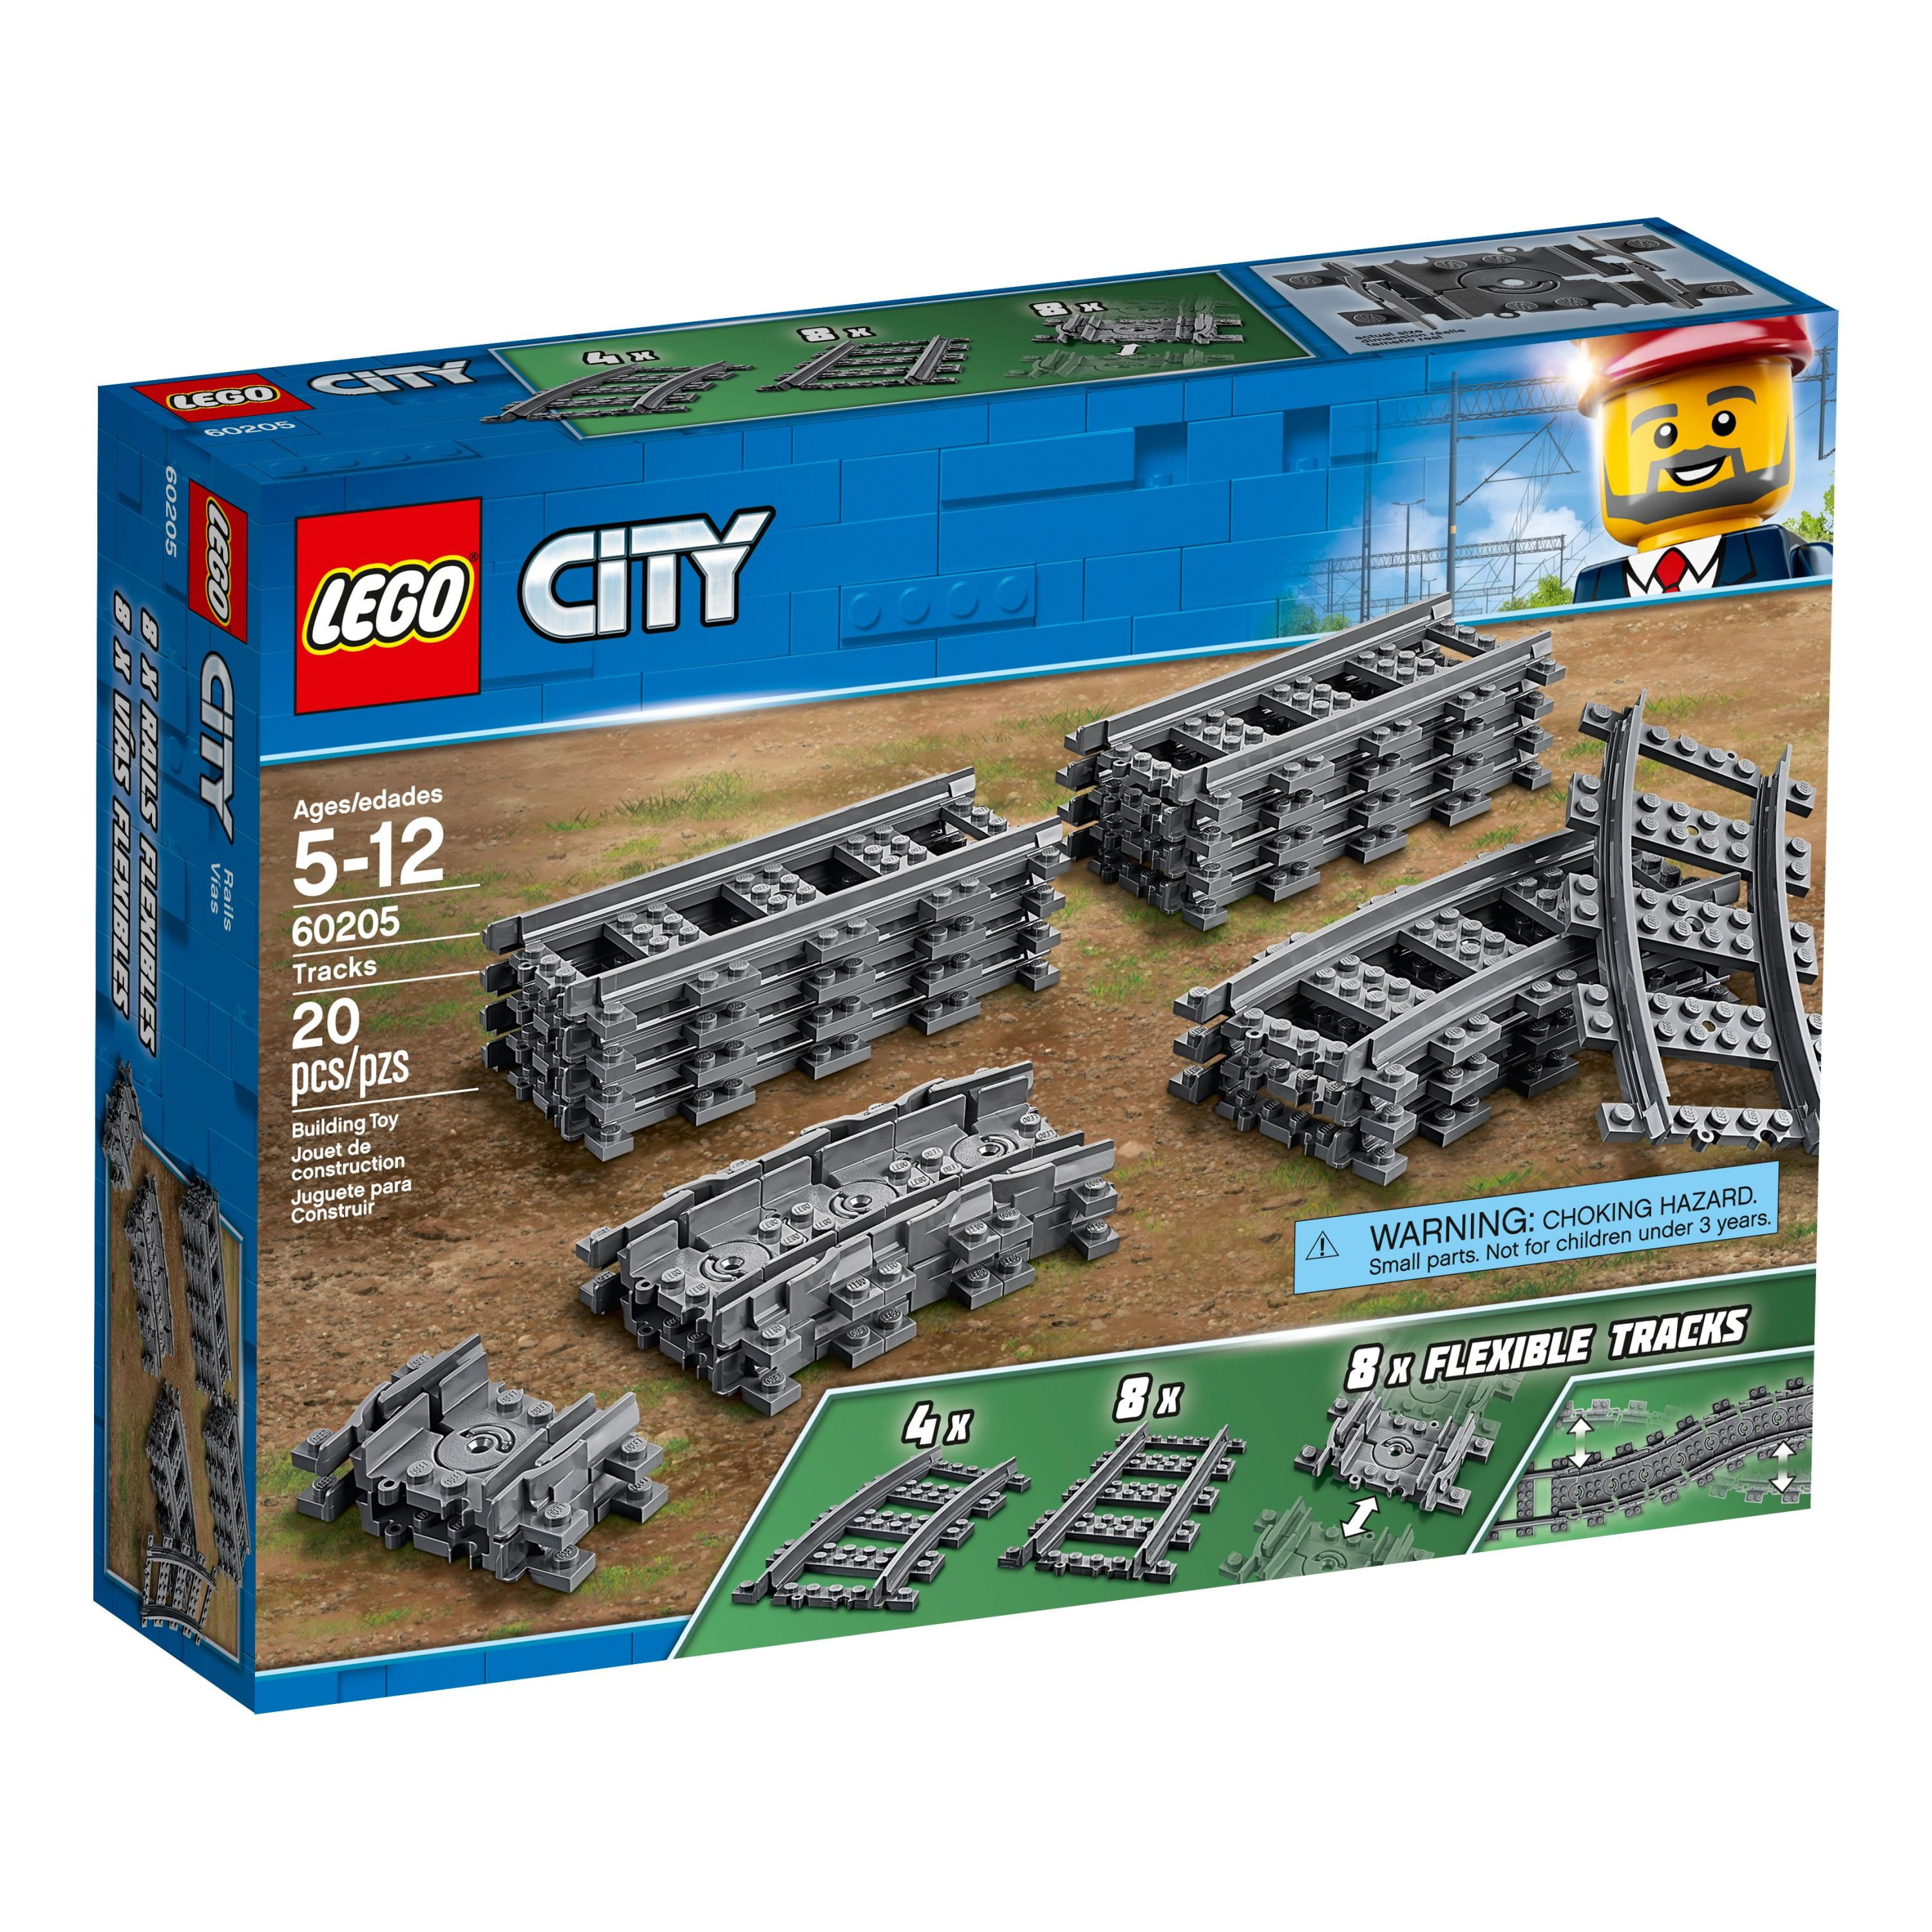 karakterisere Gå en tur regional LEGO City Tracks 60205 - 20 Pieces Extension Accessory Set, Train Track and  Railway Expansion, Compatible with LEGO City Sets, Building Toy for Kids,  Great Gift for Train and LEGO City Enthusiasts - Walmart.com